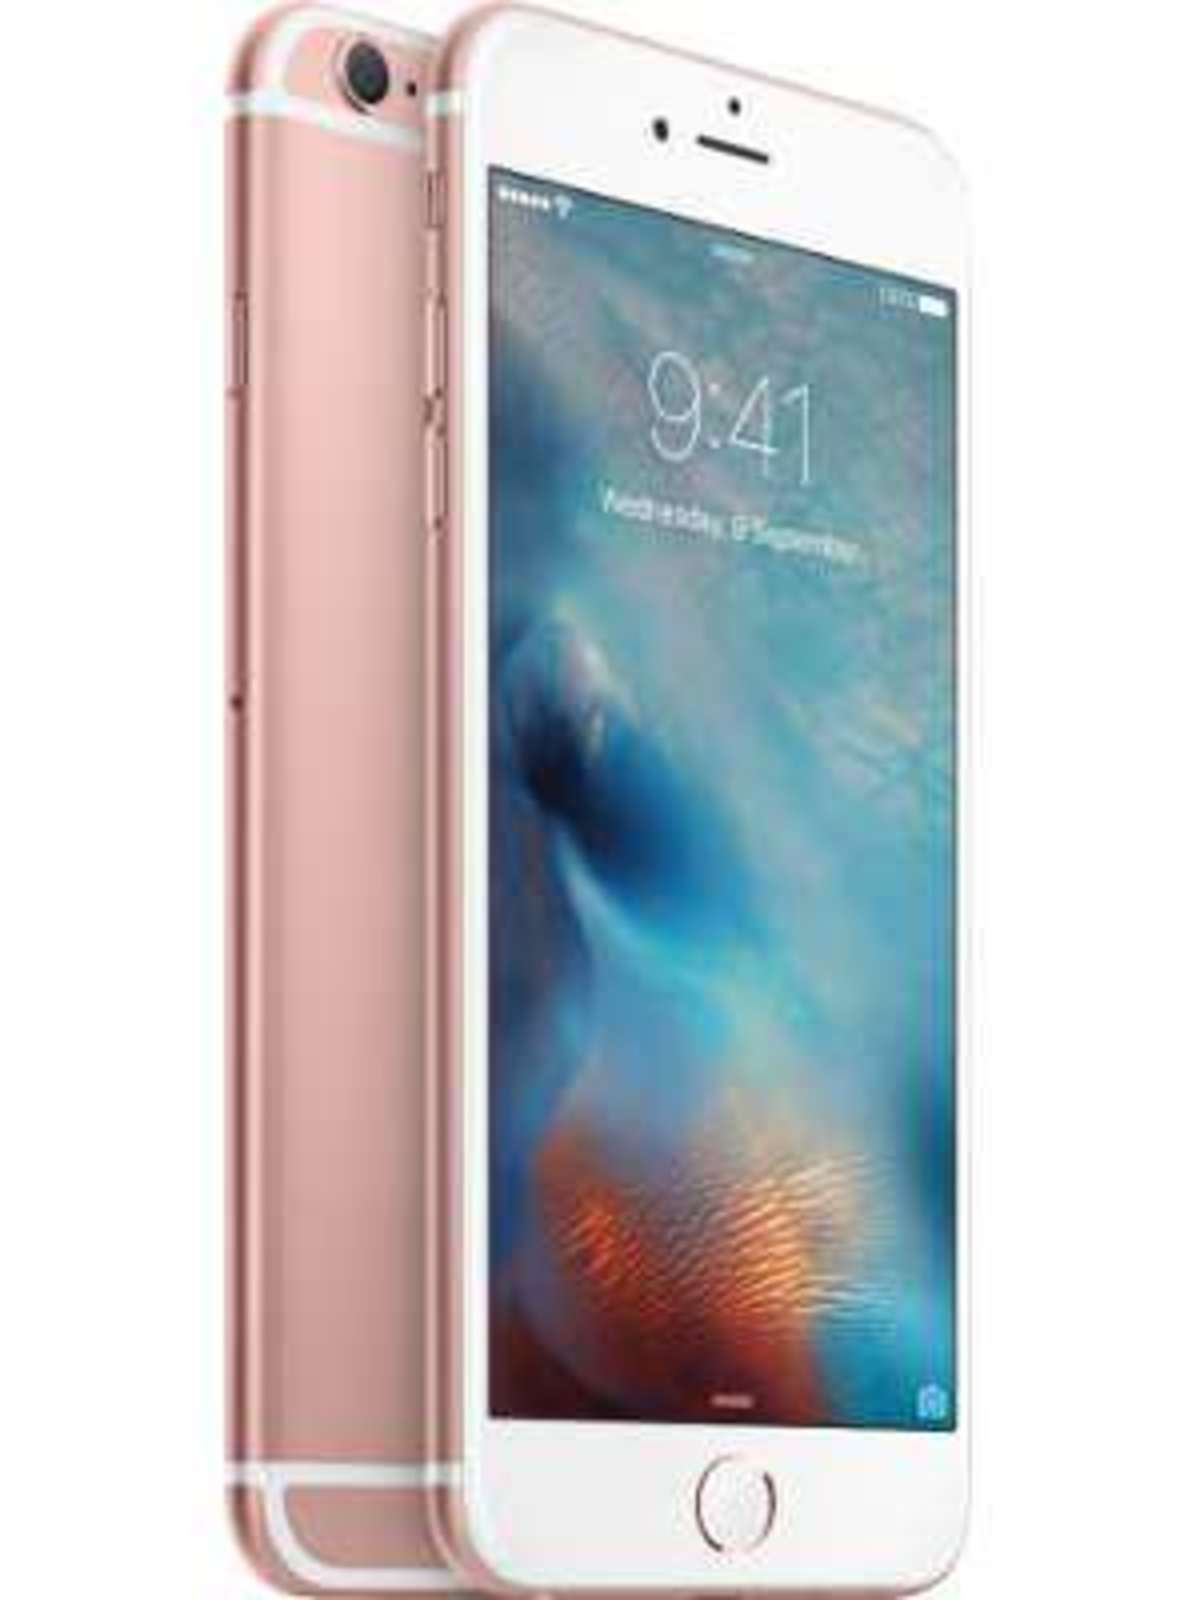 Apple Iphone 6s Plus 128gb Price In India Full Specifications 23rd Dec 22 At Gadgets Now